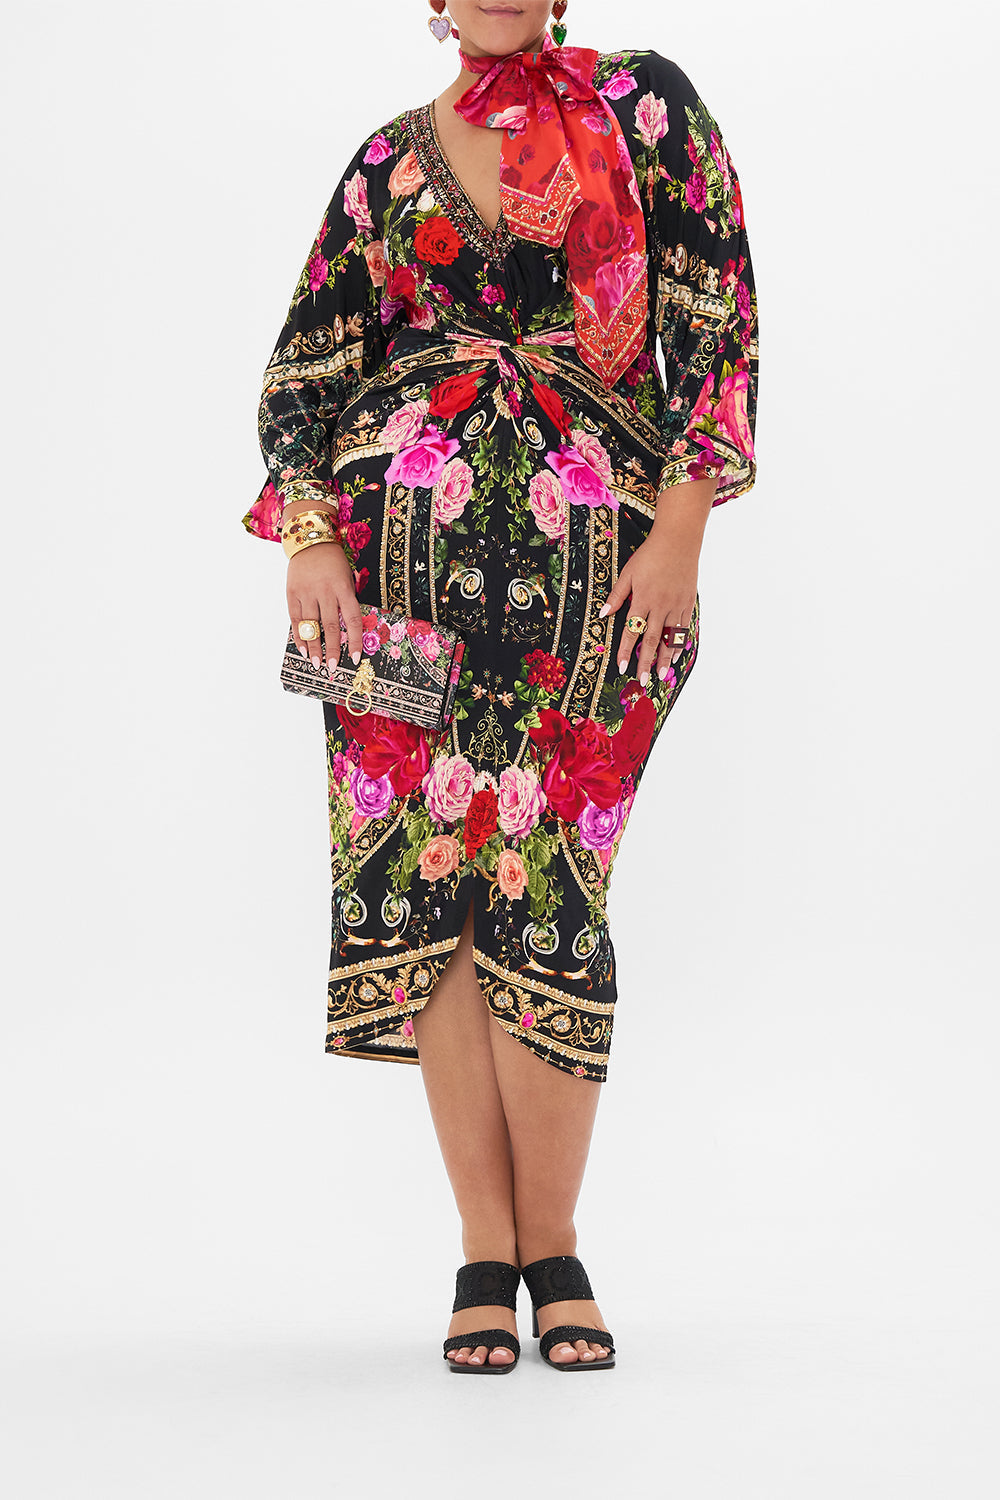 Front view of curvy model wearing CAMILLA plus size floral midi dress in Reservation For Love print